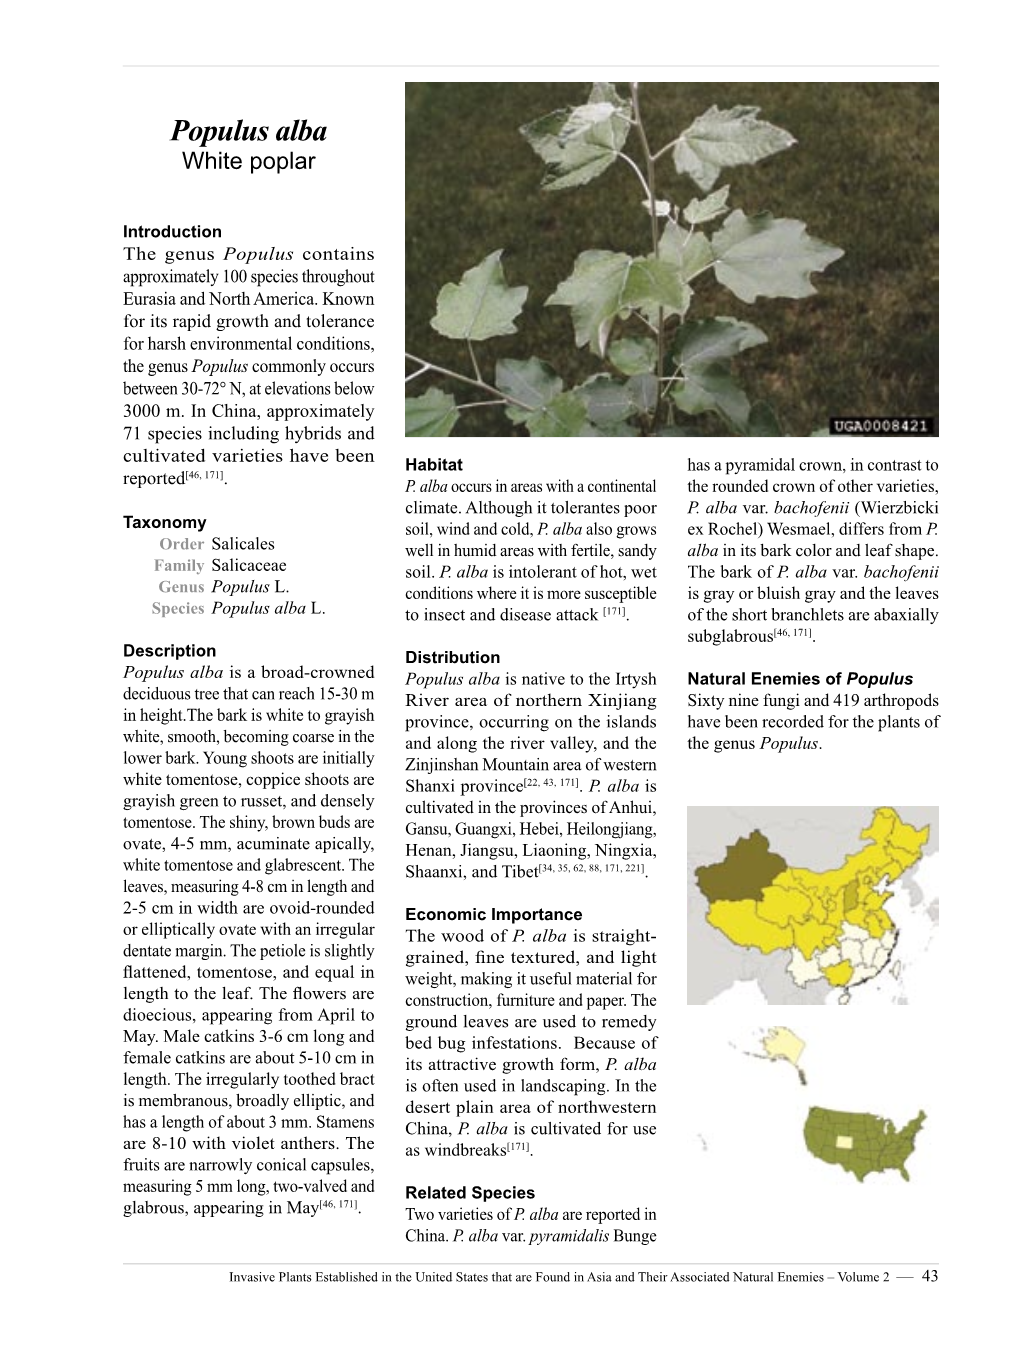 Invasive Plants Established in the United States That